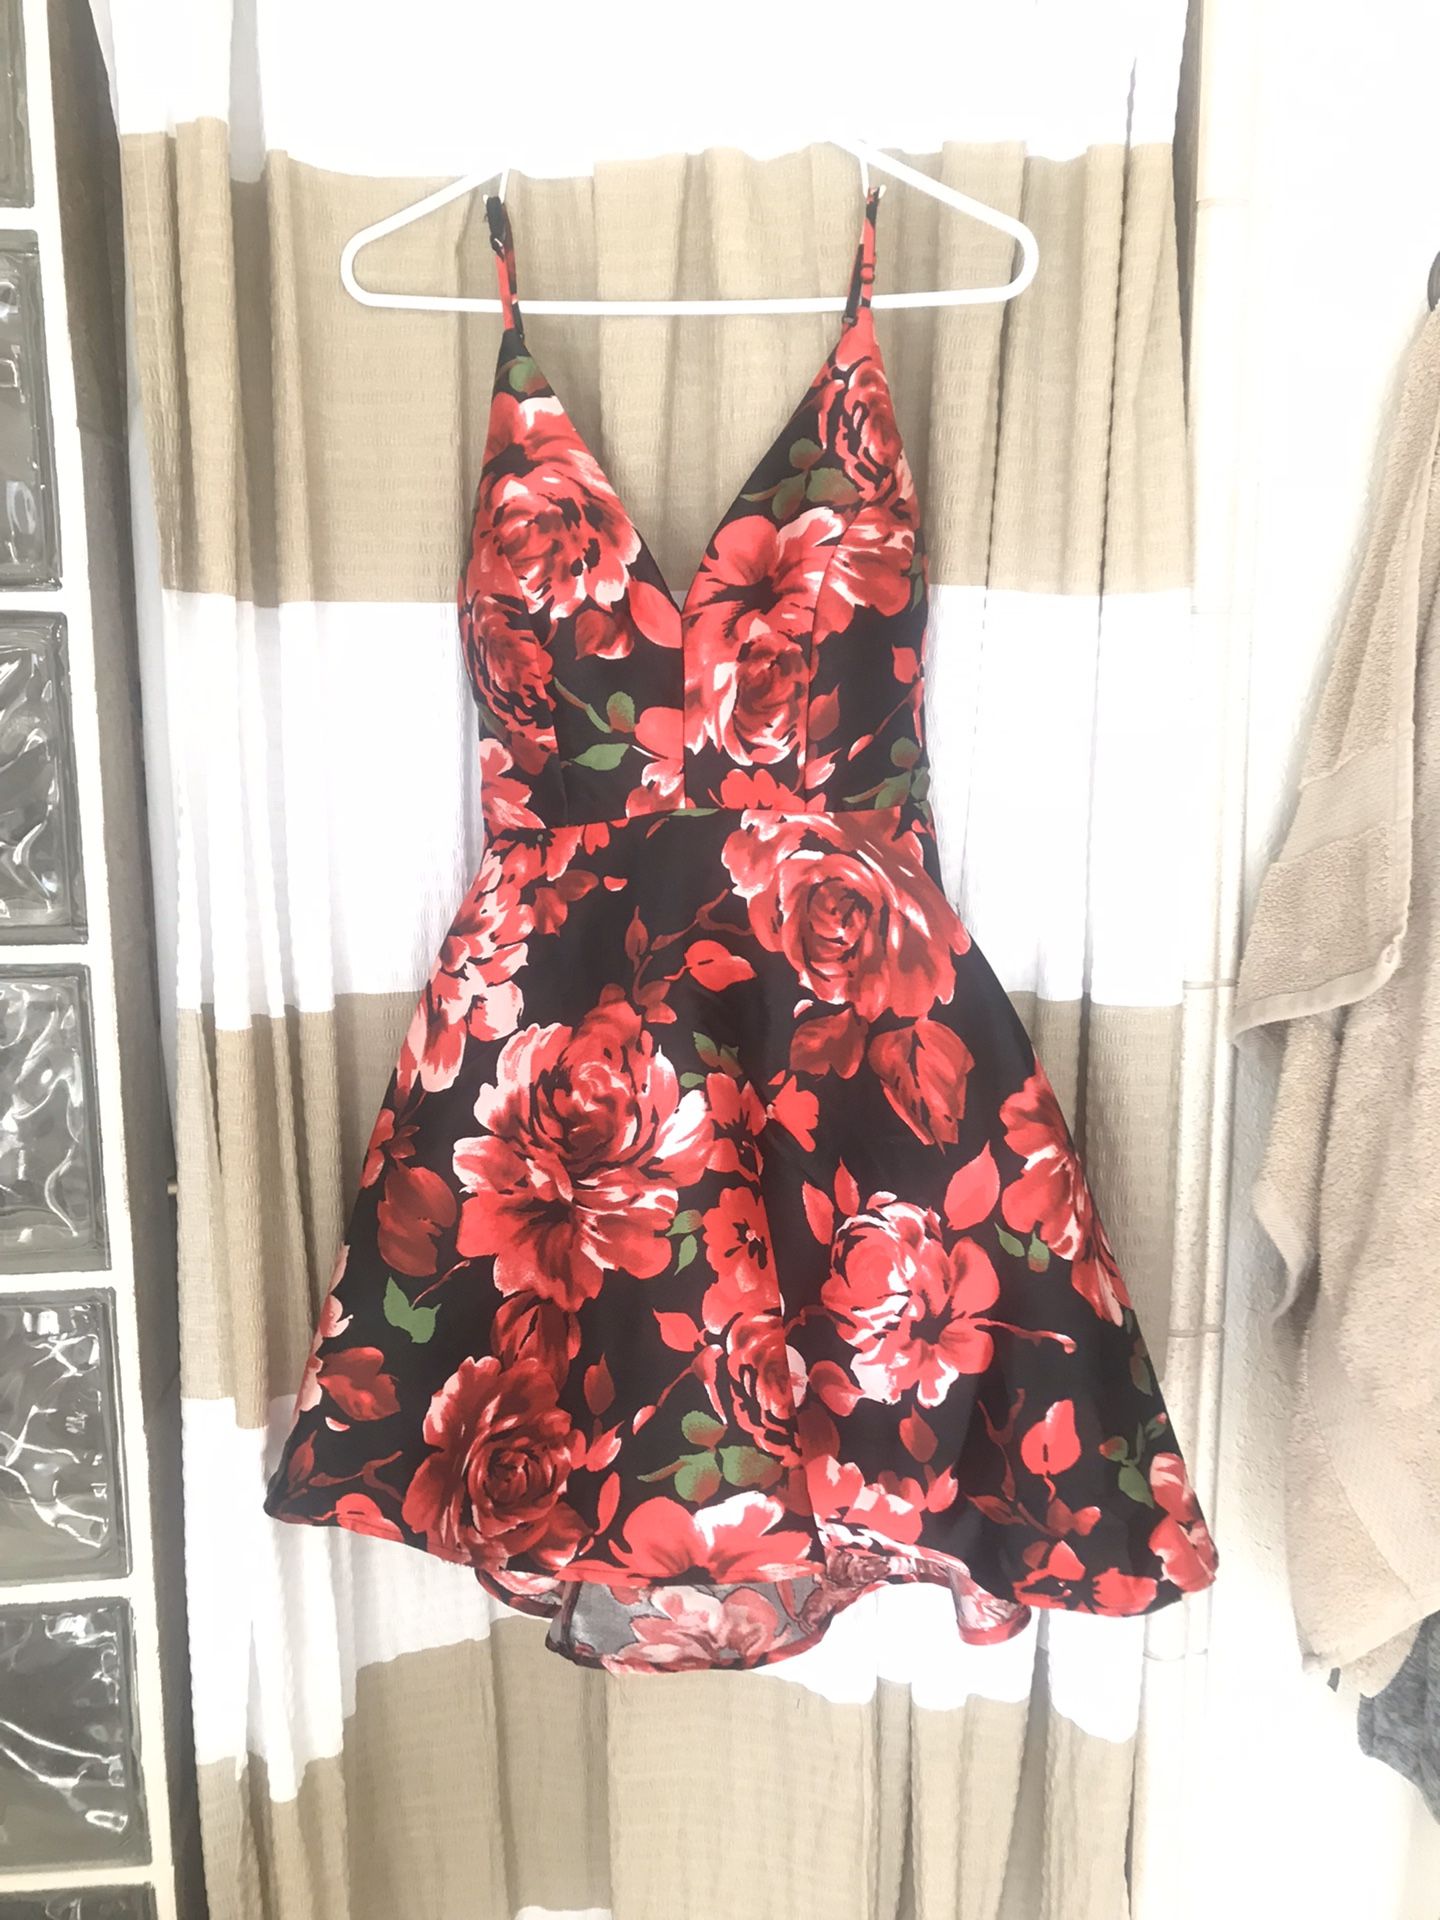 BRAND NEW floral dress size 3.